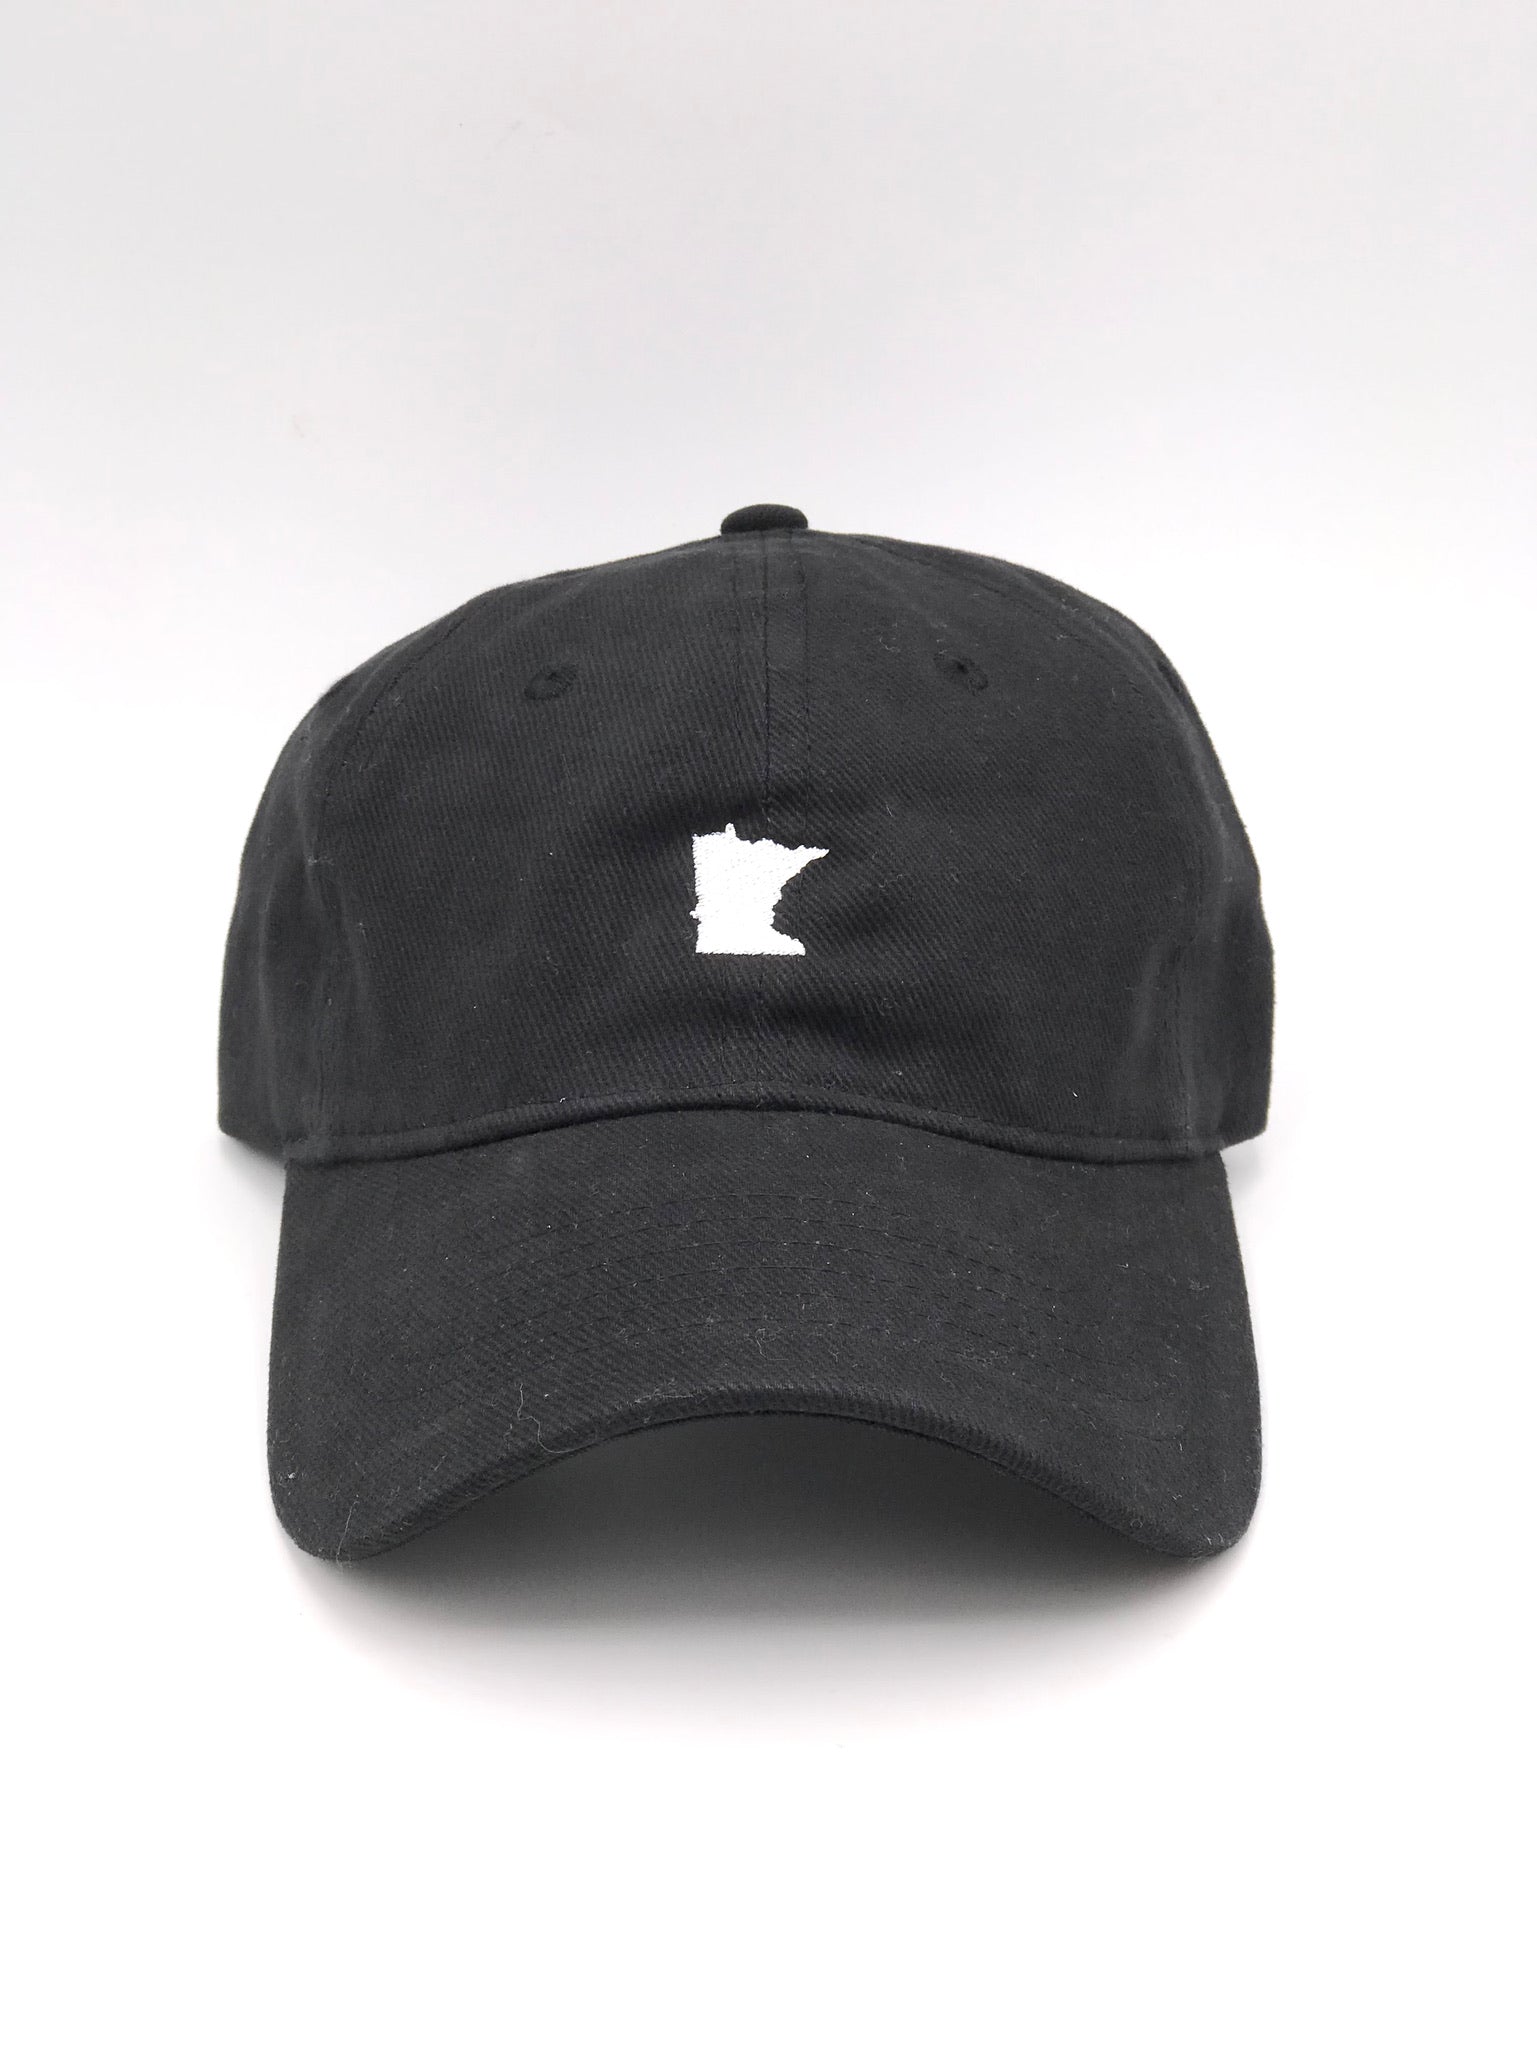 Black Embroidered MN Hat